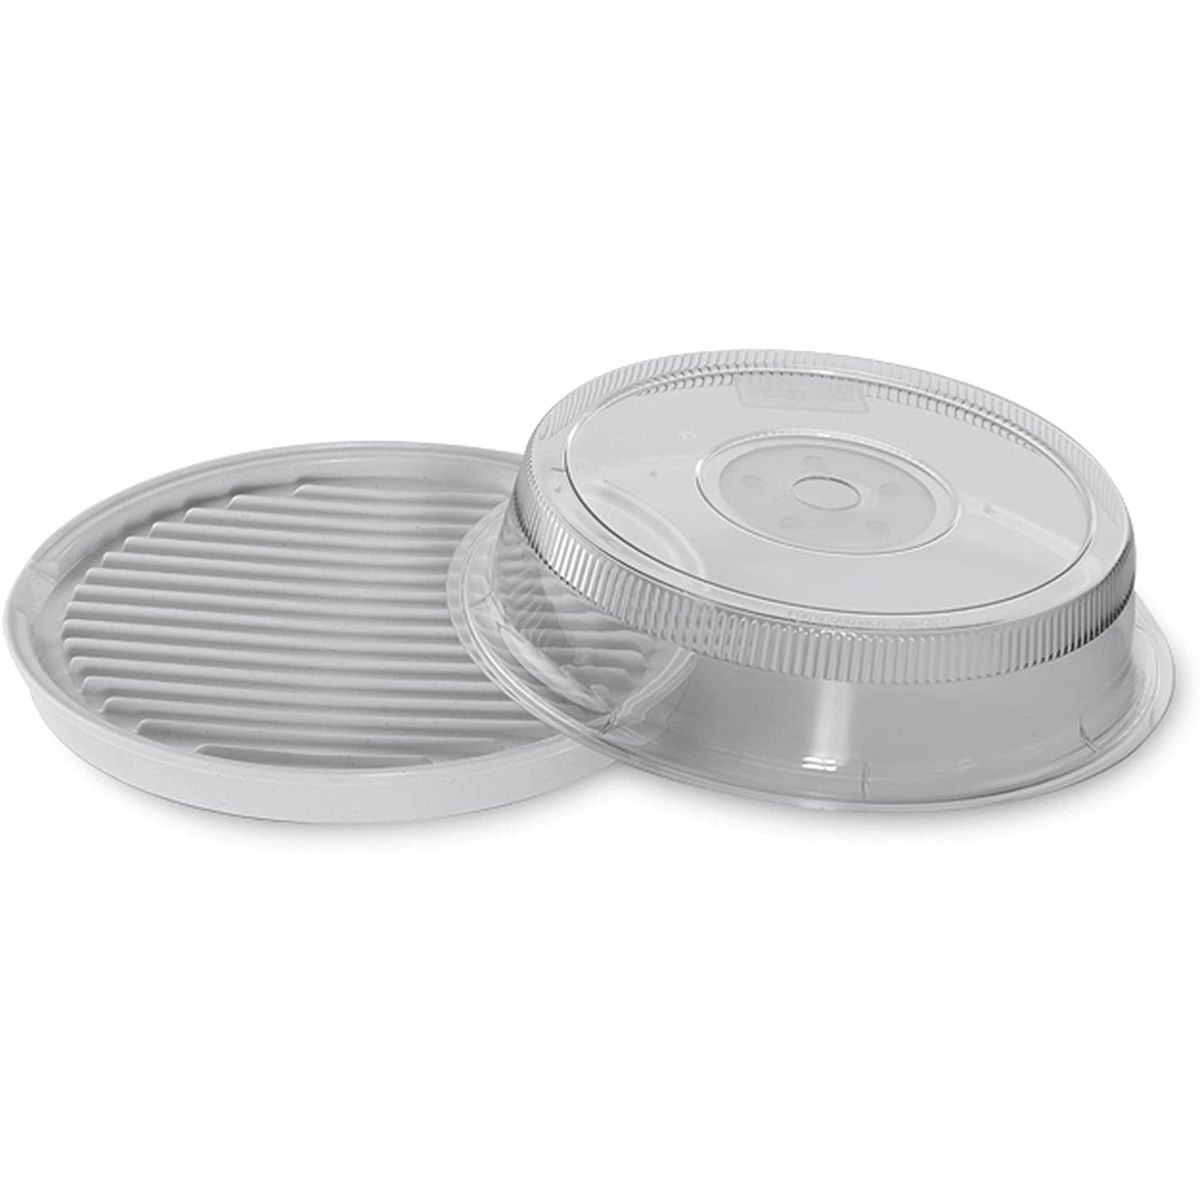 Nordic Ware Microwavable Cookware